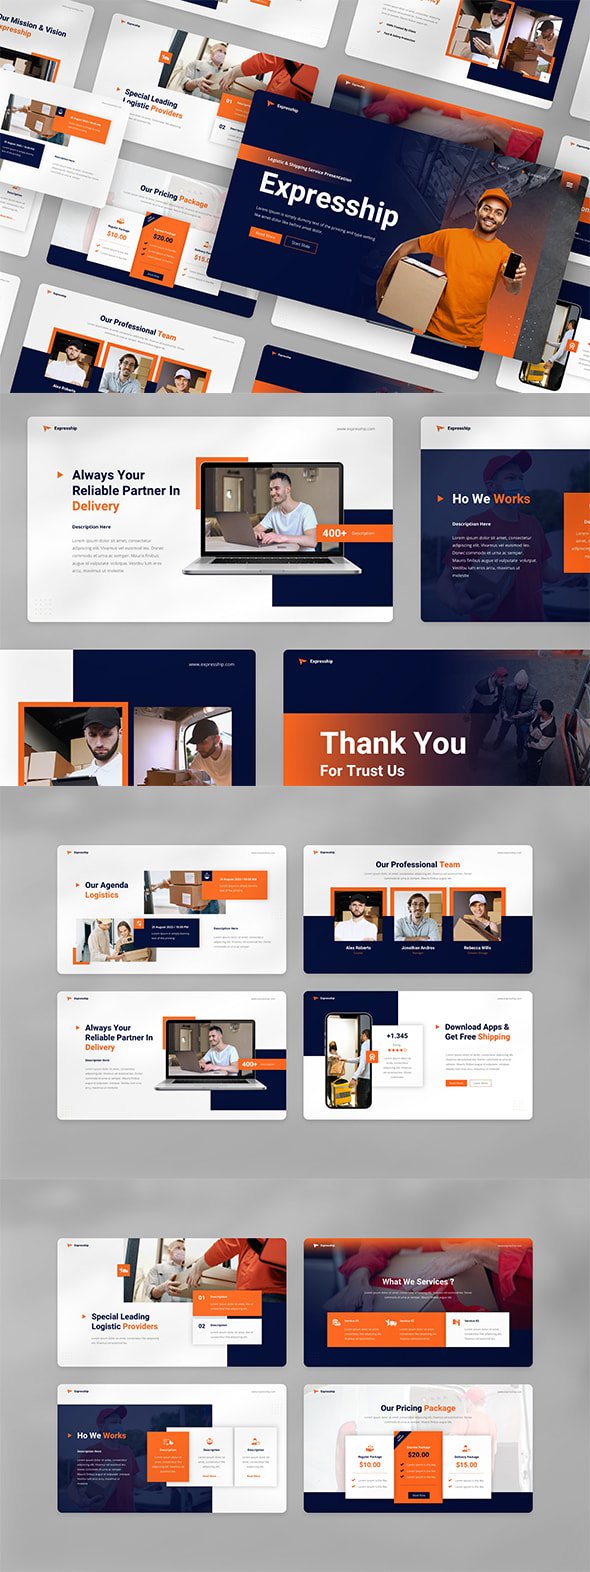 GraphicRiver - Expresship - Logistic & Shipping Service Powerpoint Template - 45258789